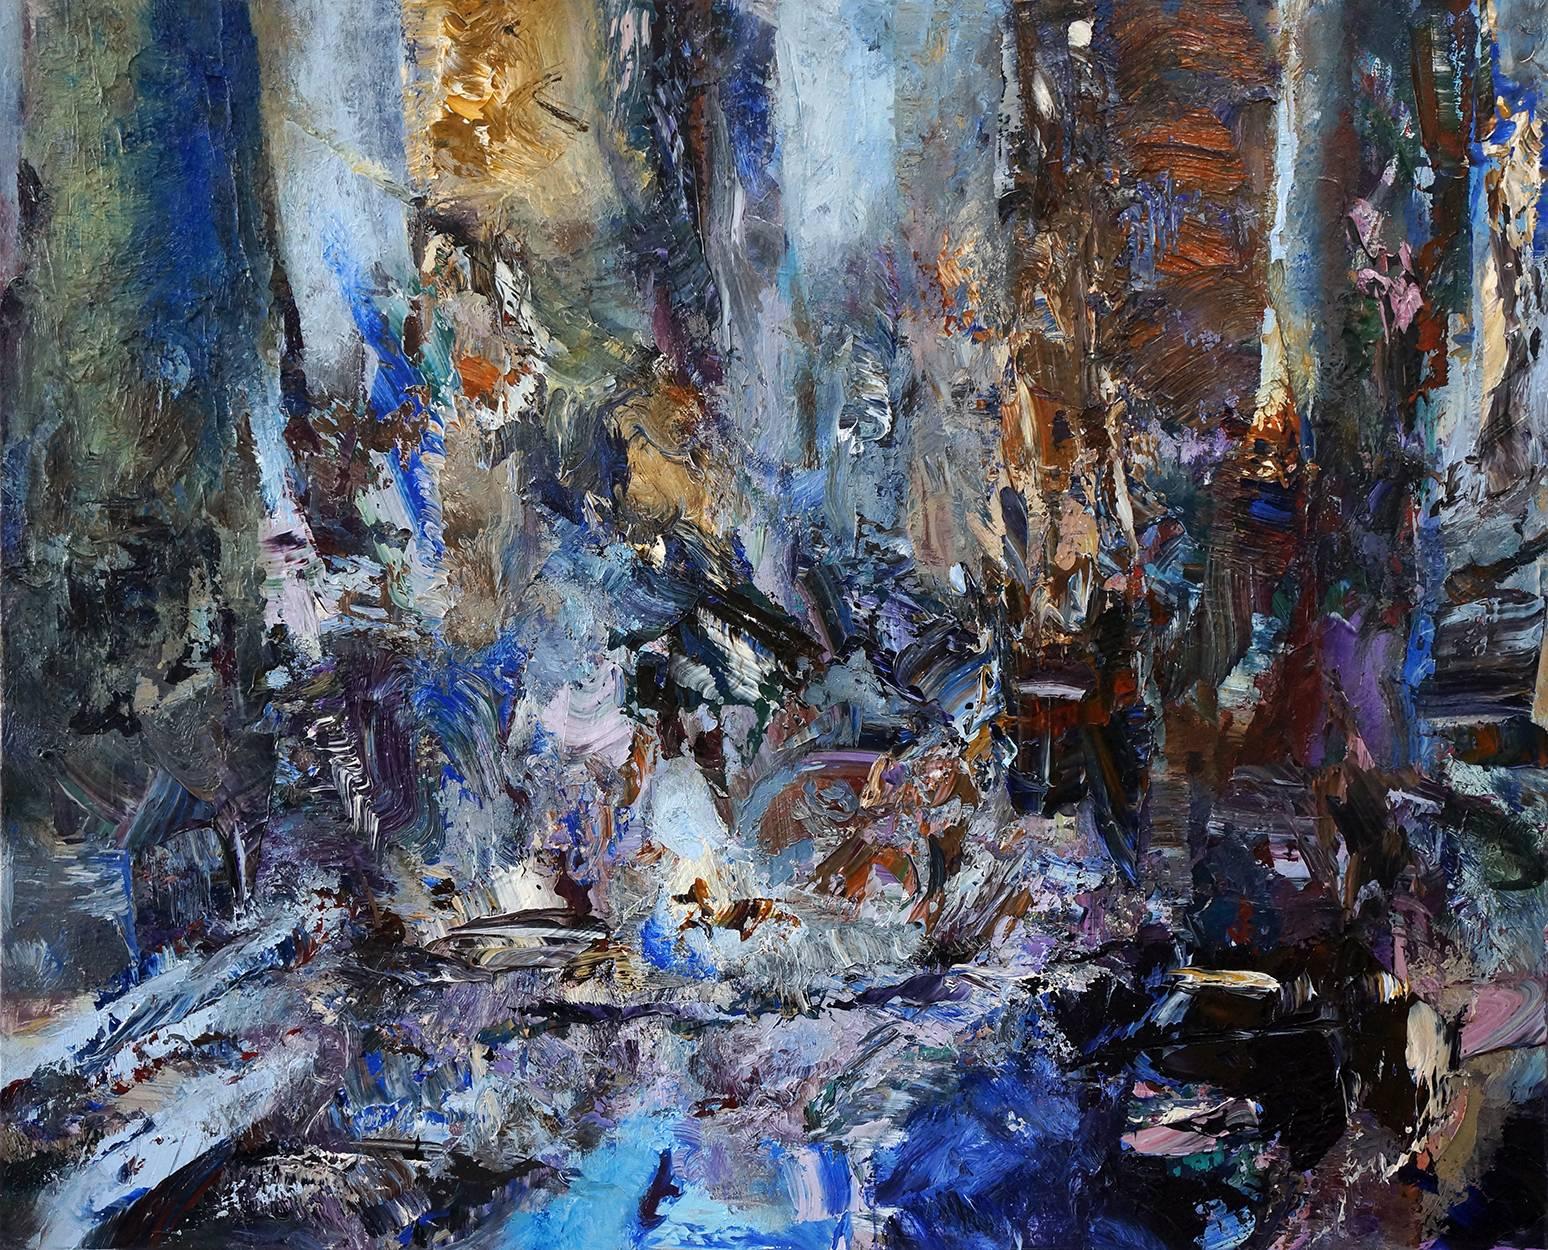 Michael Smith Landscape Painting - Cobalt Ground, abstract acrylic painting on canvas